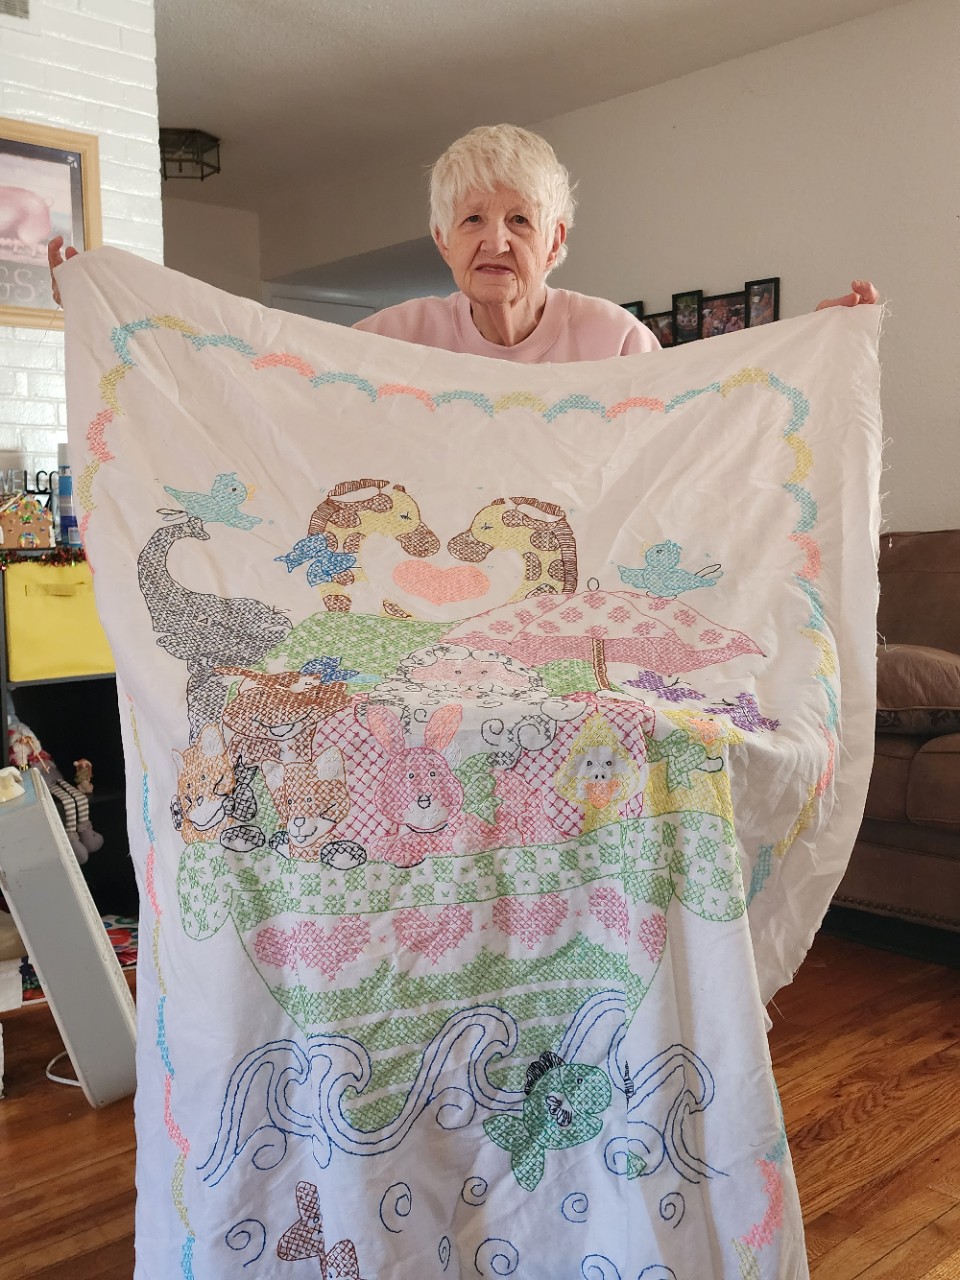 an intricately sewn blanket with a white background and all sorts of animals in pastel colors; it appears to be a scene of Noah's ark with pairs of animals in a boat on the water